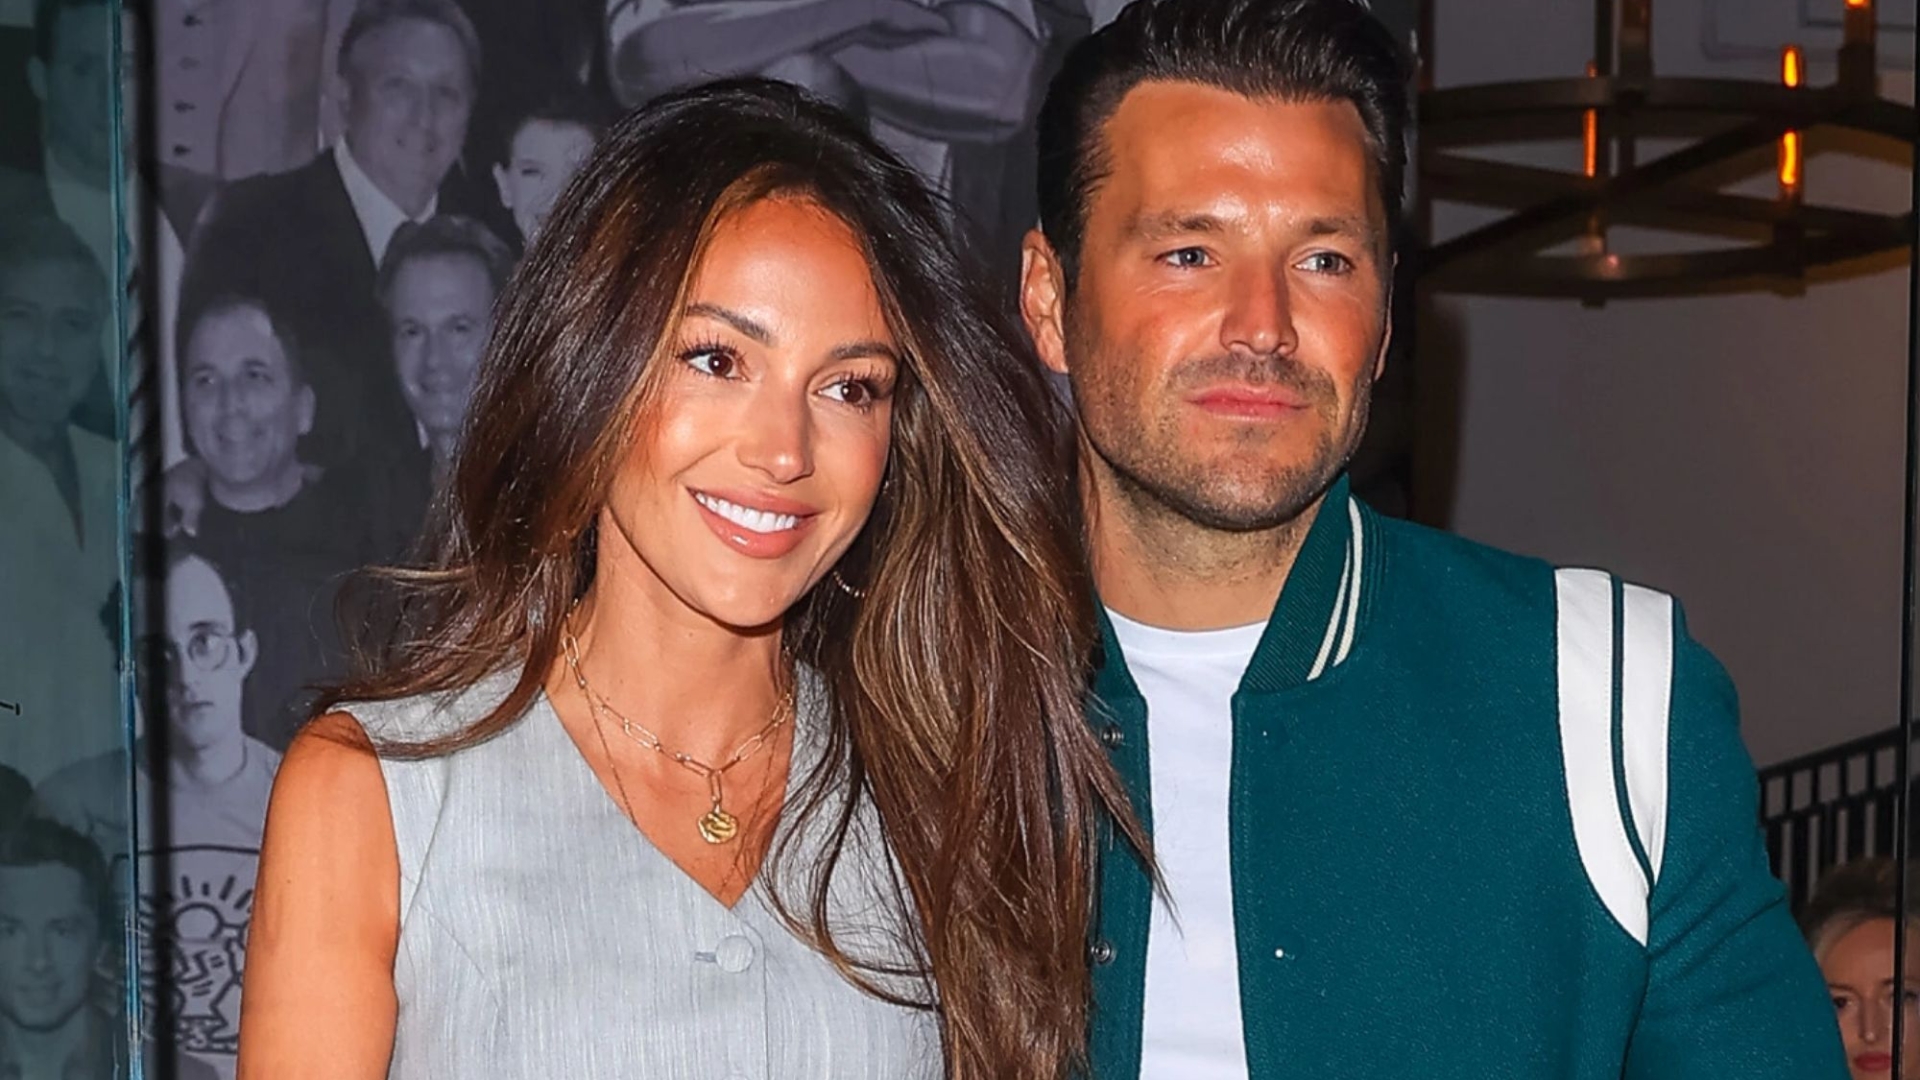 Michelle Keegan makes fans go wild with tiny crop-top showing her toned abs